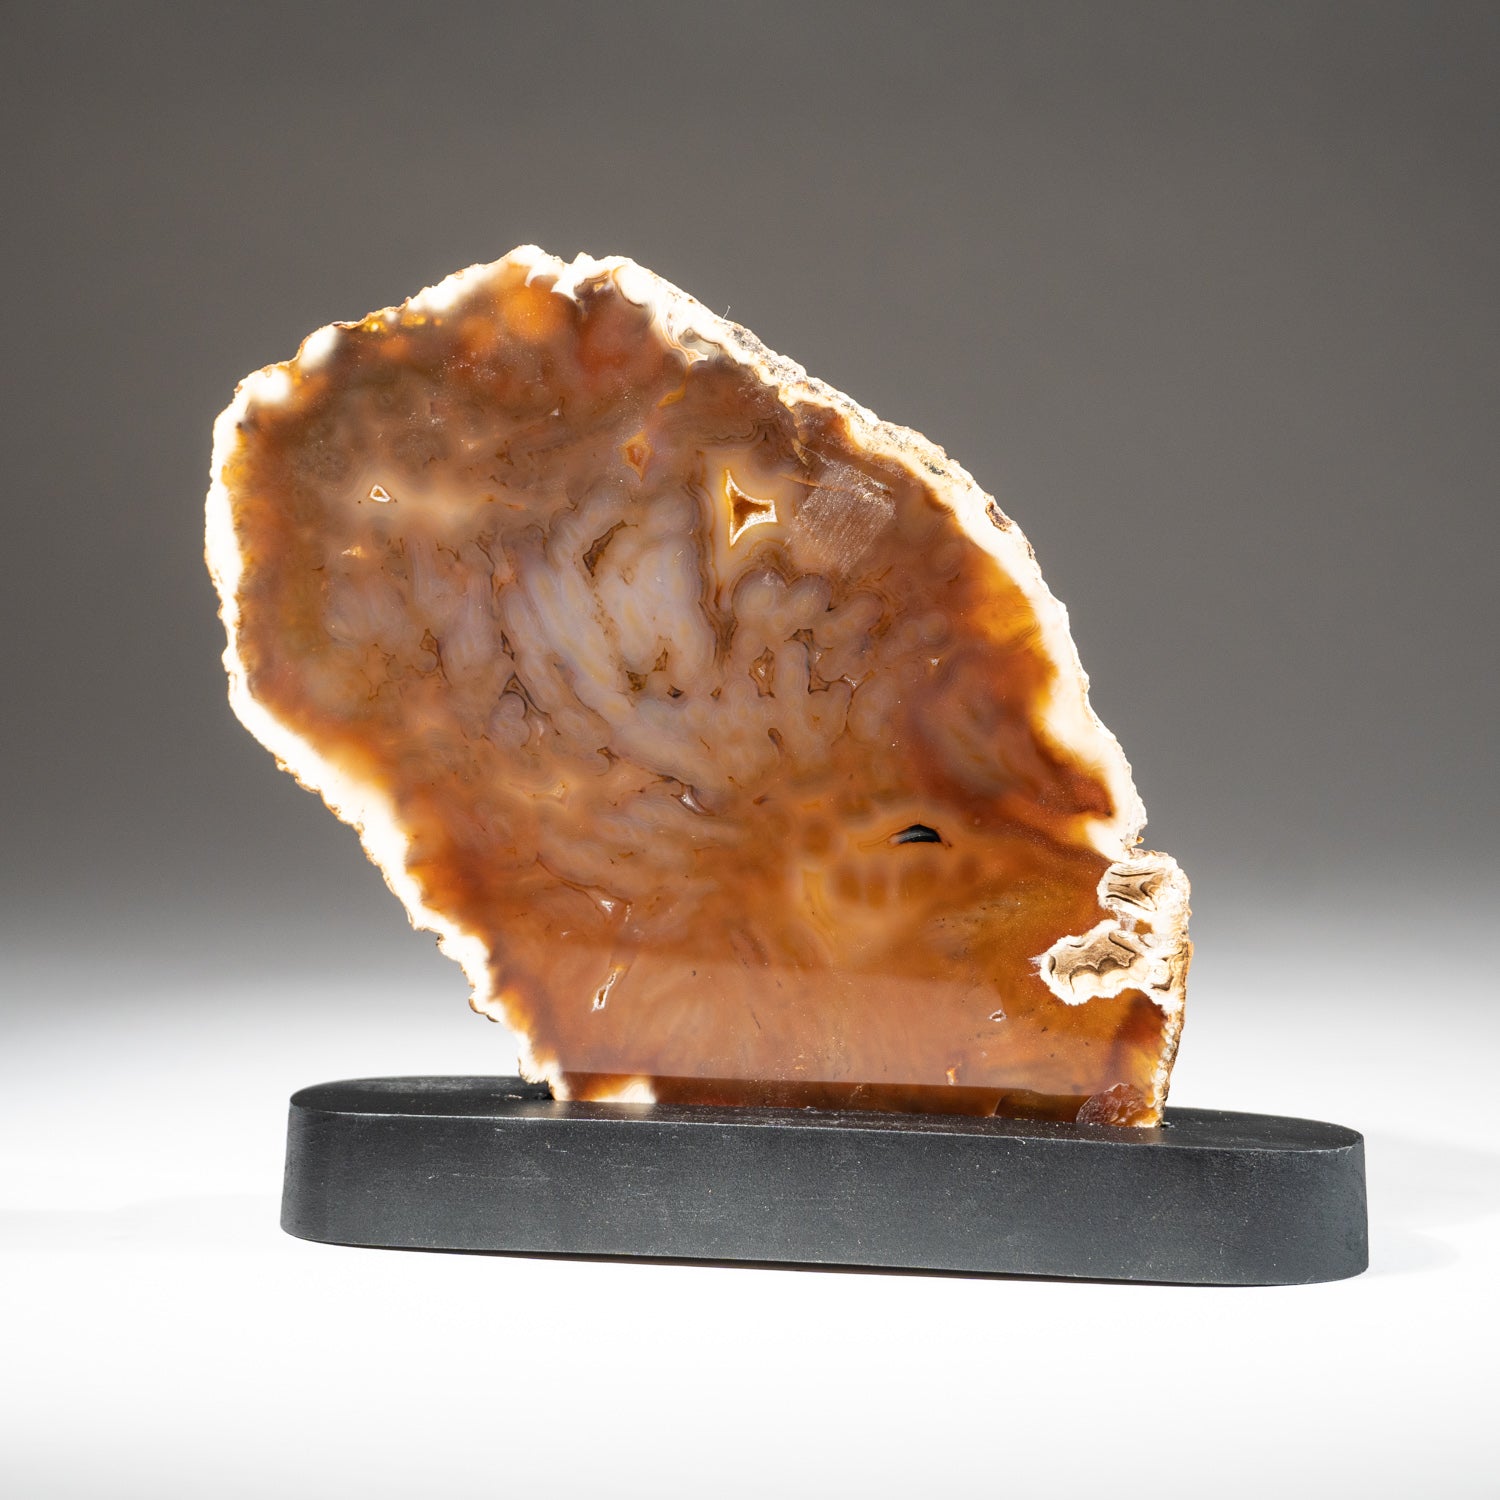 Polished Natural Agate Slice on Wooden Stand (.9 lbs)